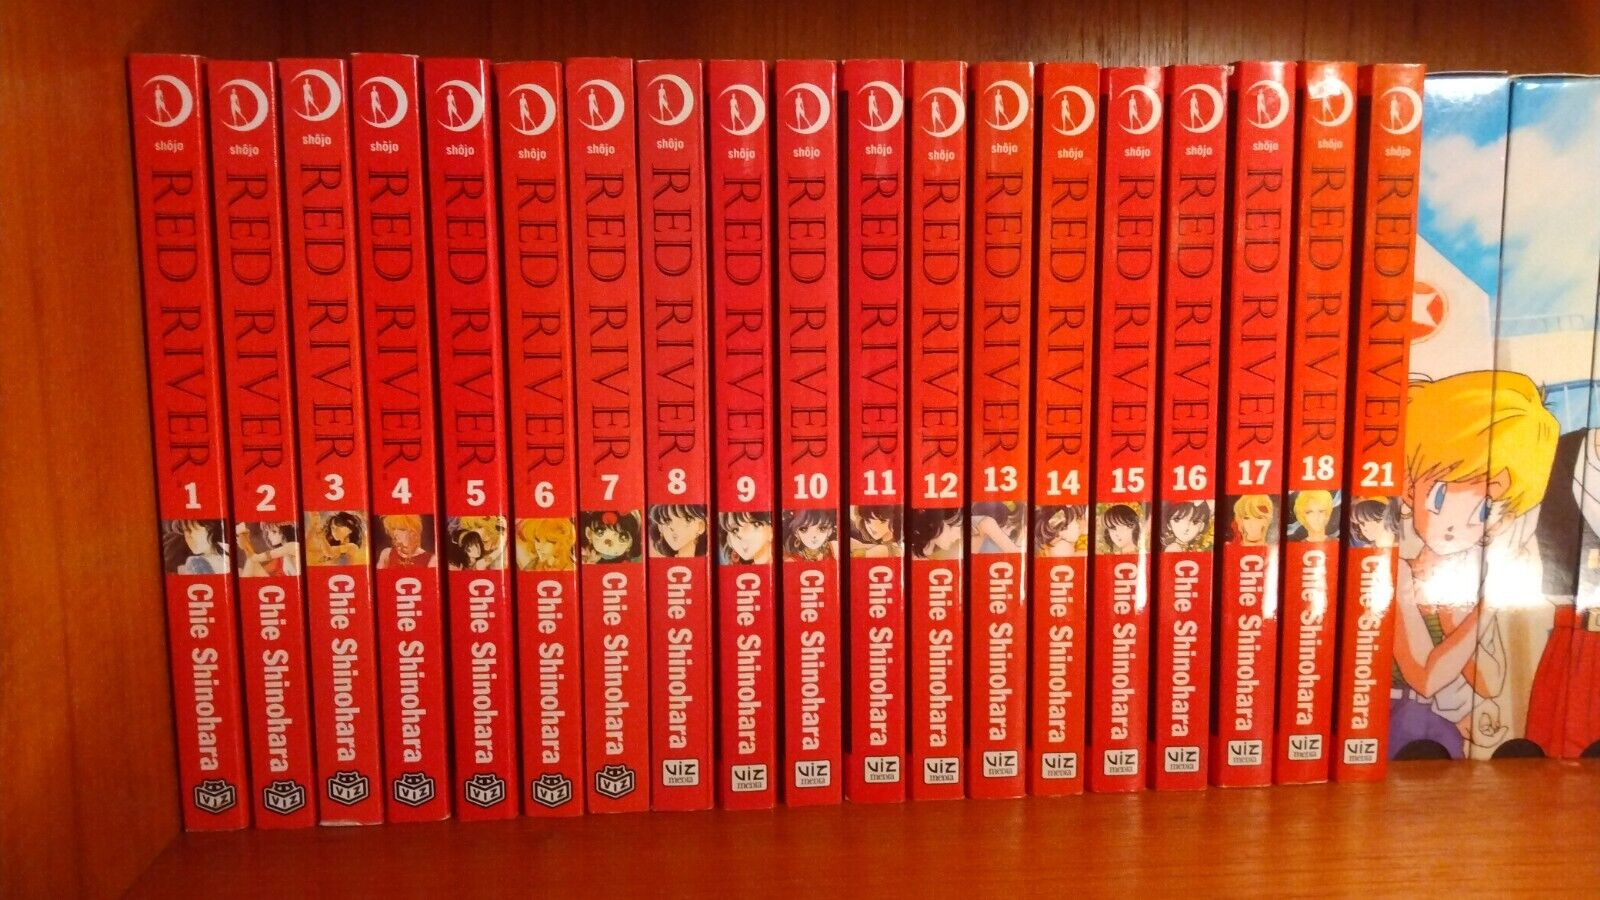 Red River Manga vol 1 - 18 & 21 ENGLISH RARE EXCELLENT CONDITION 